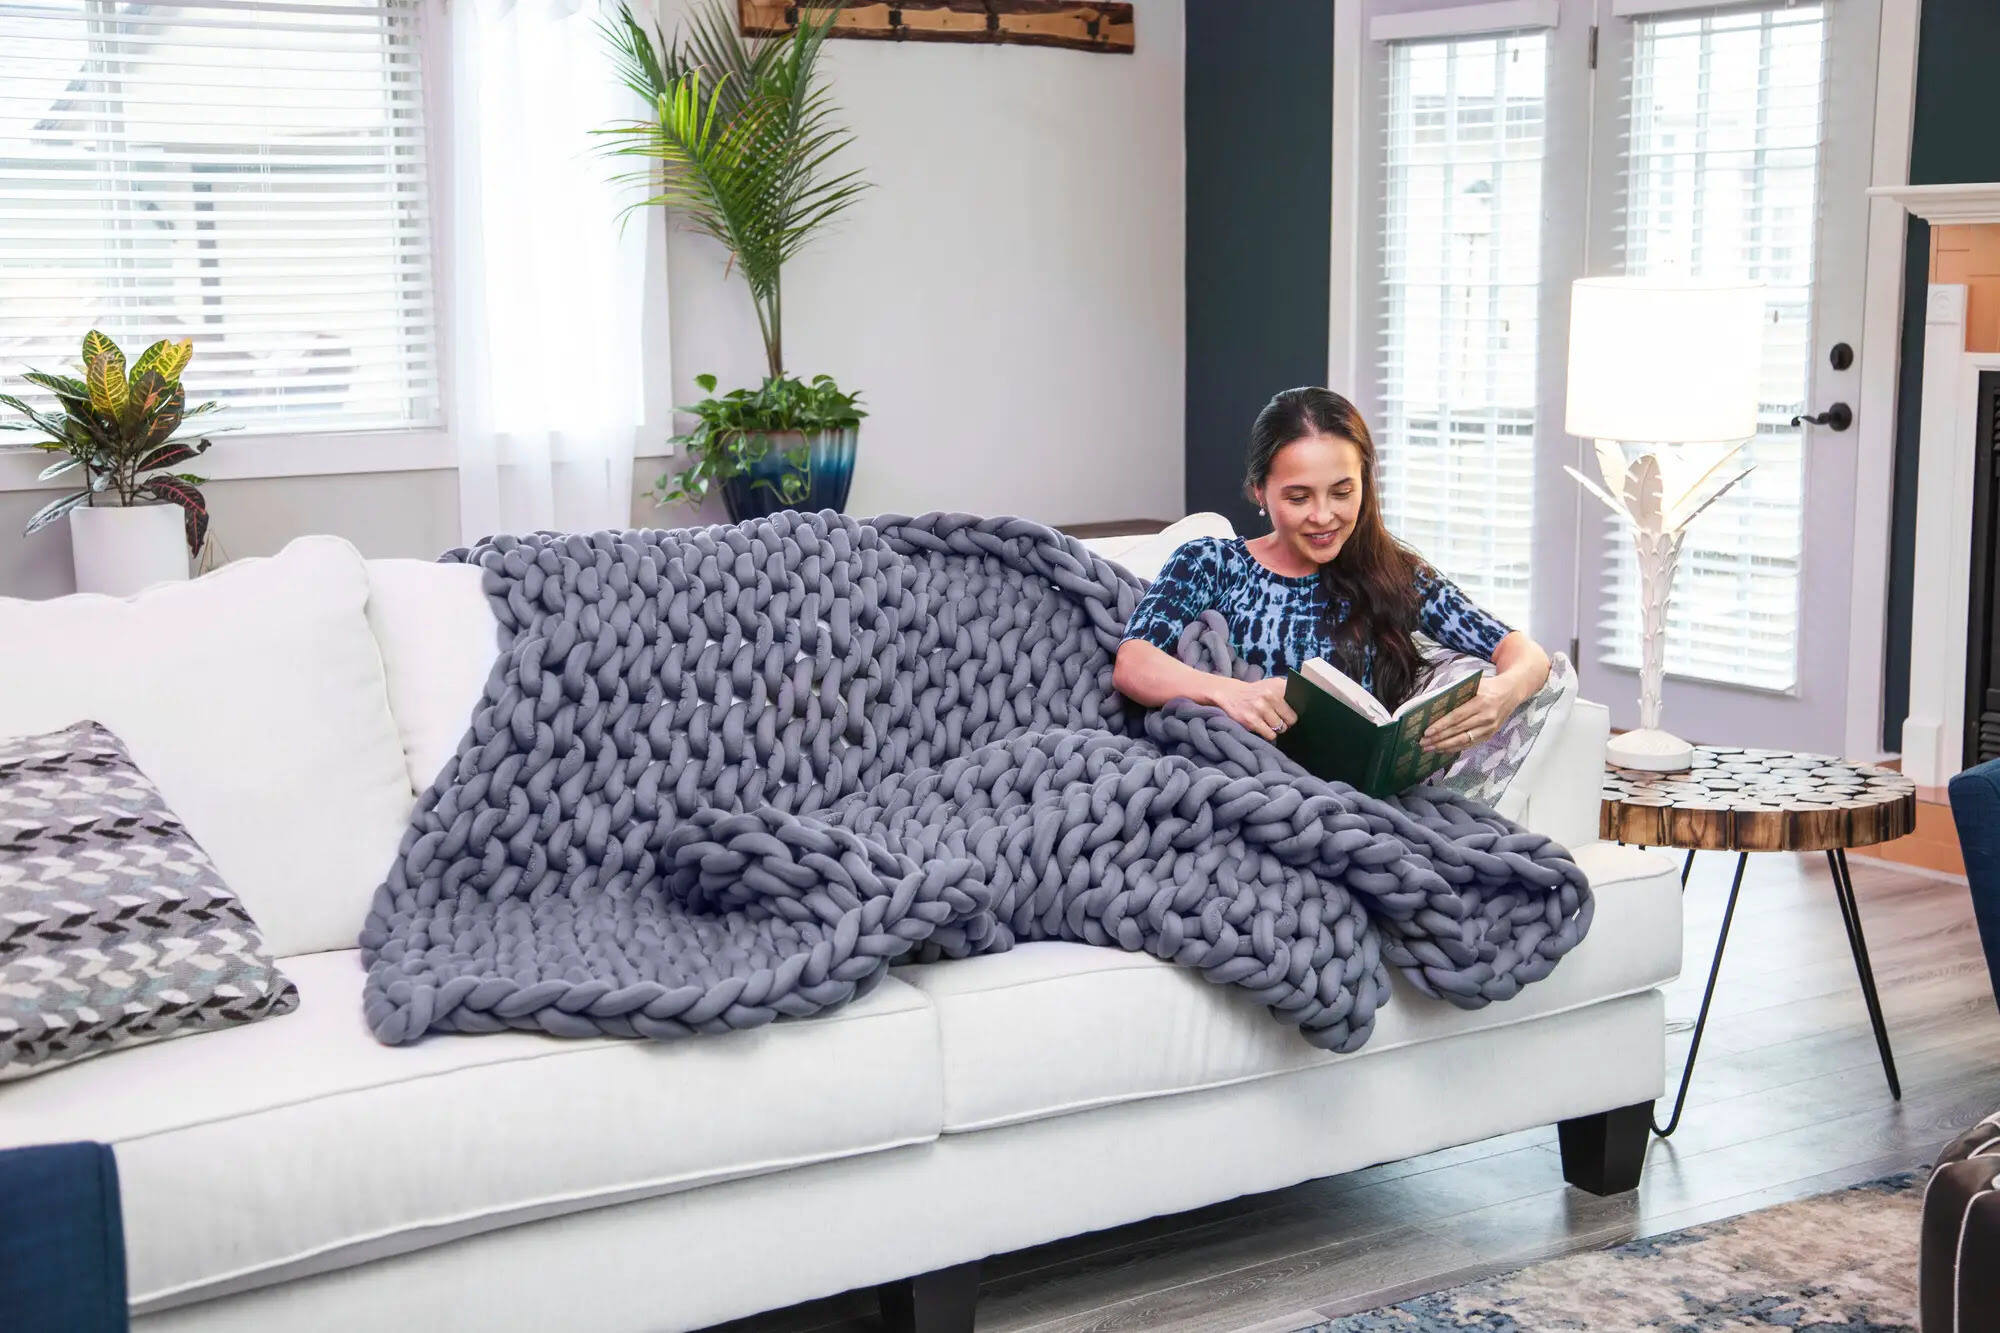 How To Create Weighted Blankets For Sensory Relaxation